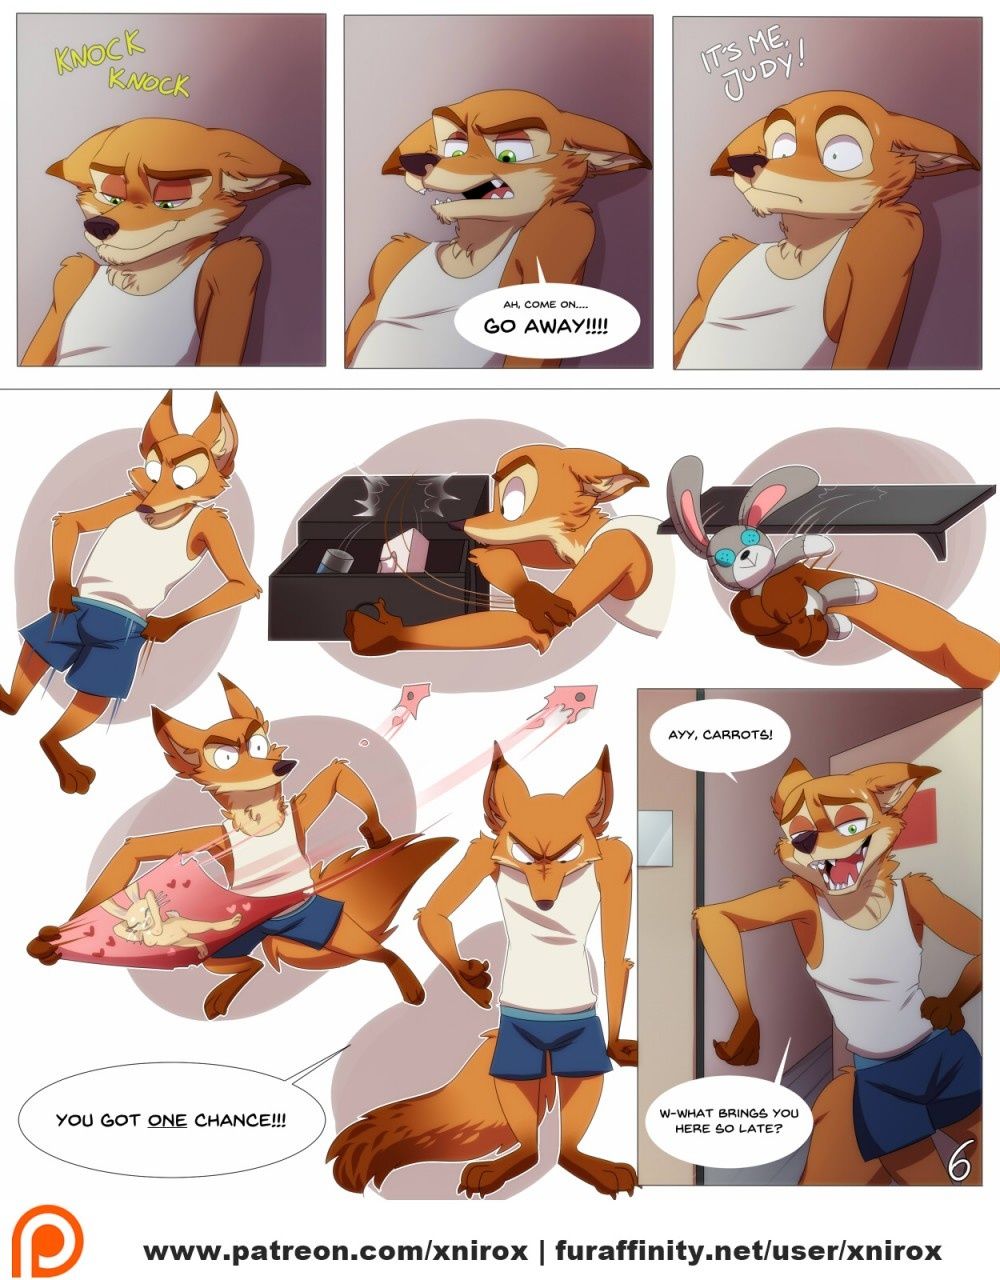 [Xnirox] Zootopia - Twitterpated, Furry Cartoon page 6